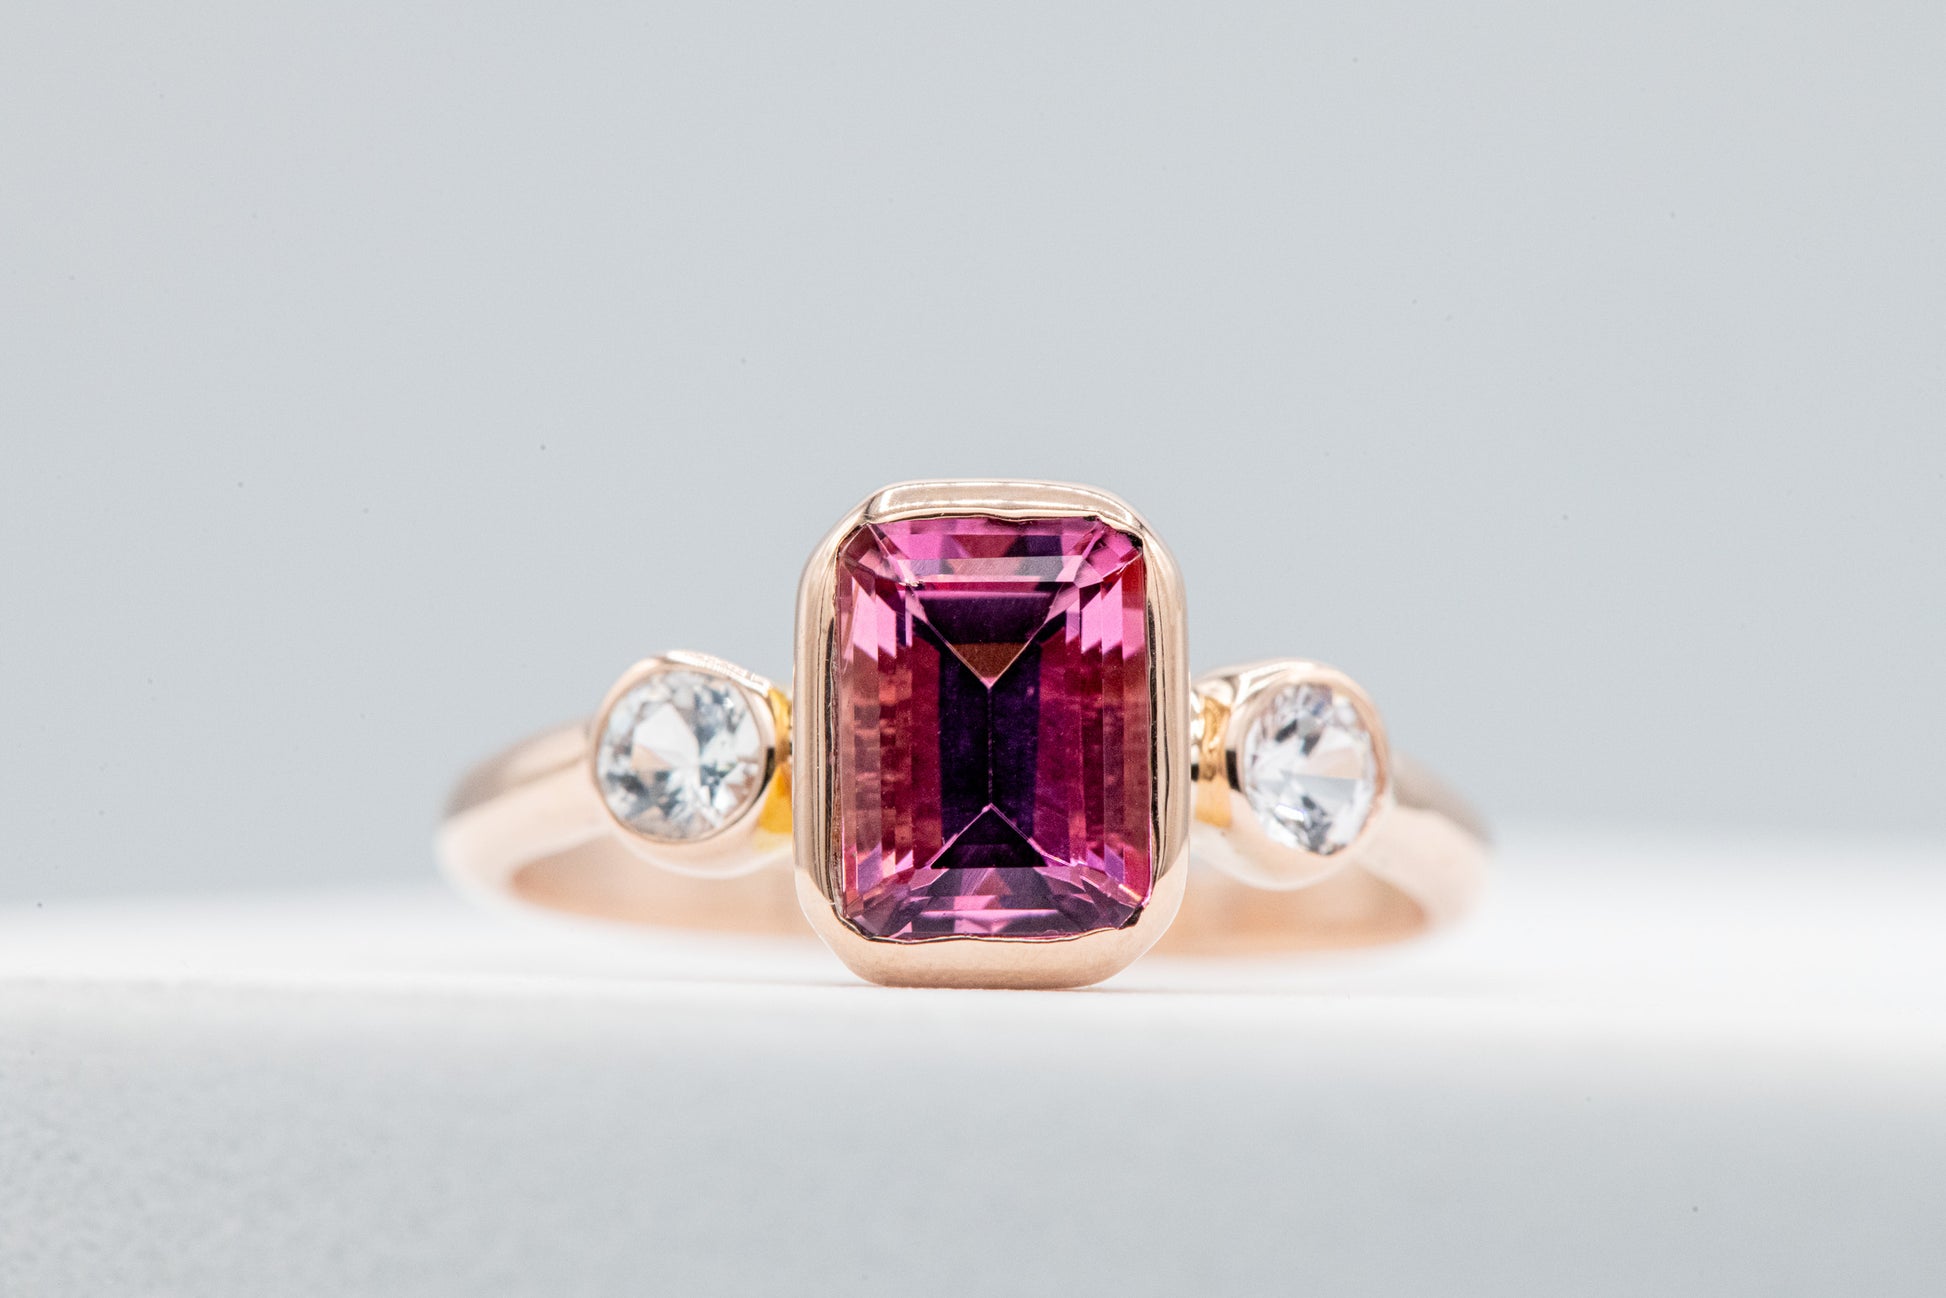 A handmade emerald cut Pink Tourmaline and diamond ring by Cassin Jewelry.